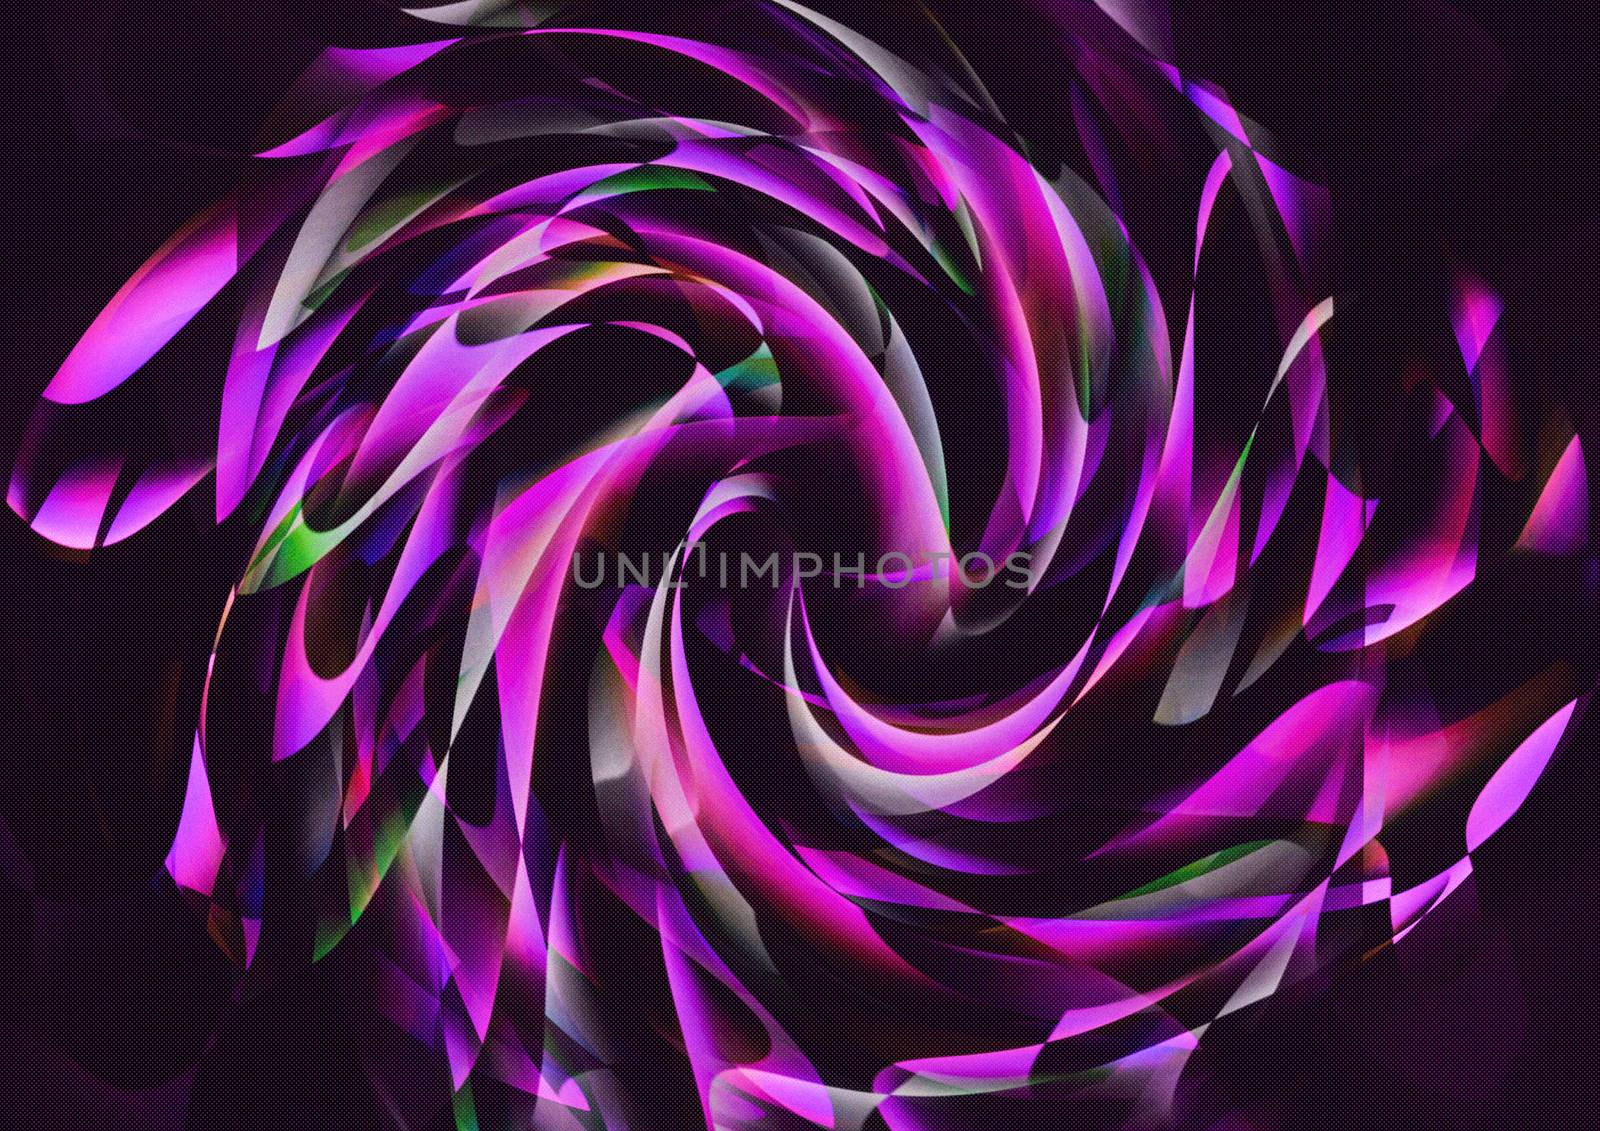 A turbulent bouquet of art, an abstract textured image of a beautiful swirl in purple tones